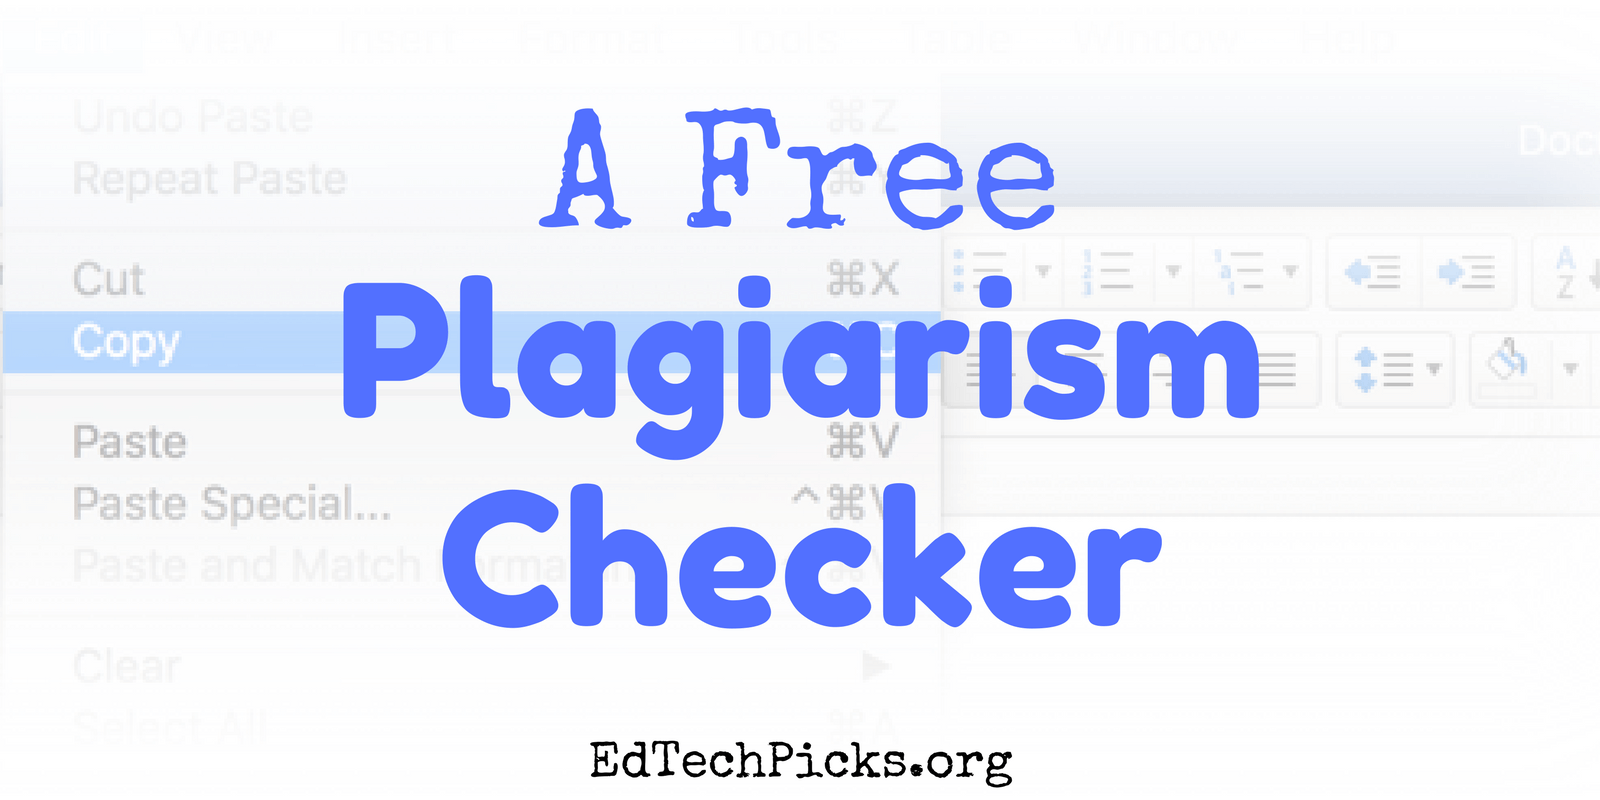 free plagiarism checker for students